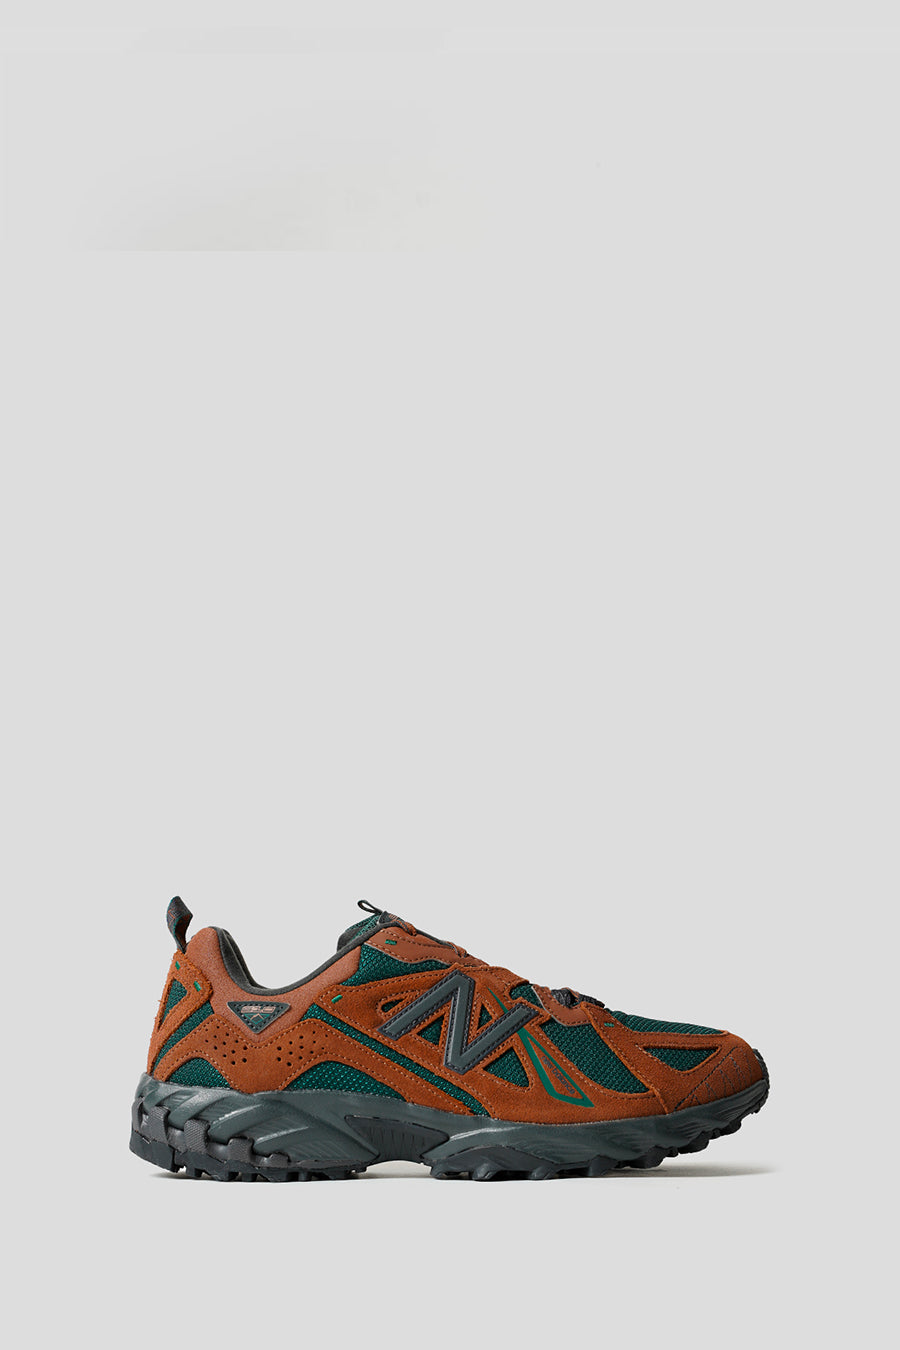 NEW BALANCE - SNEAKERS 610V1 TRUE BROWN ET NIGHTWATCH GREEN - LE LABO STORE